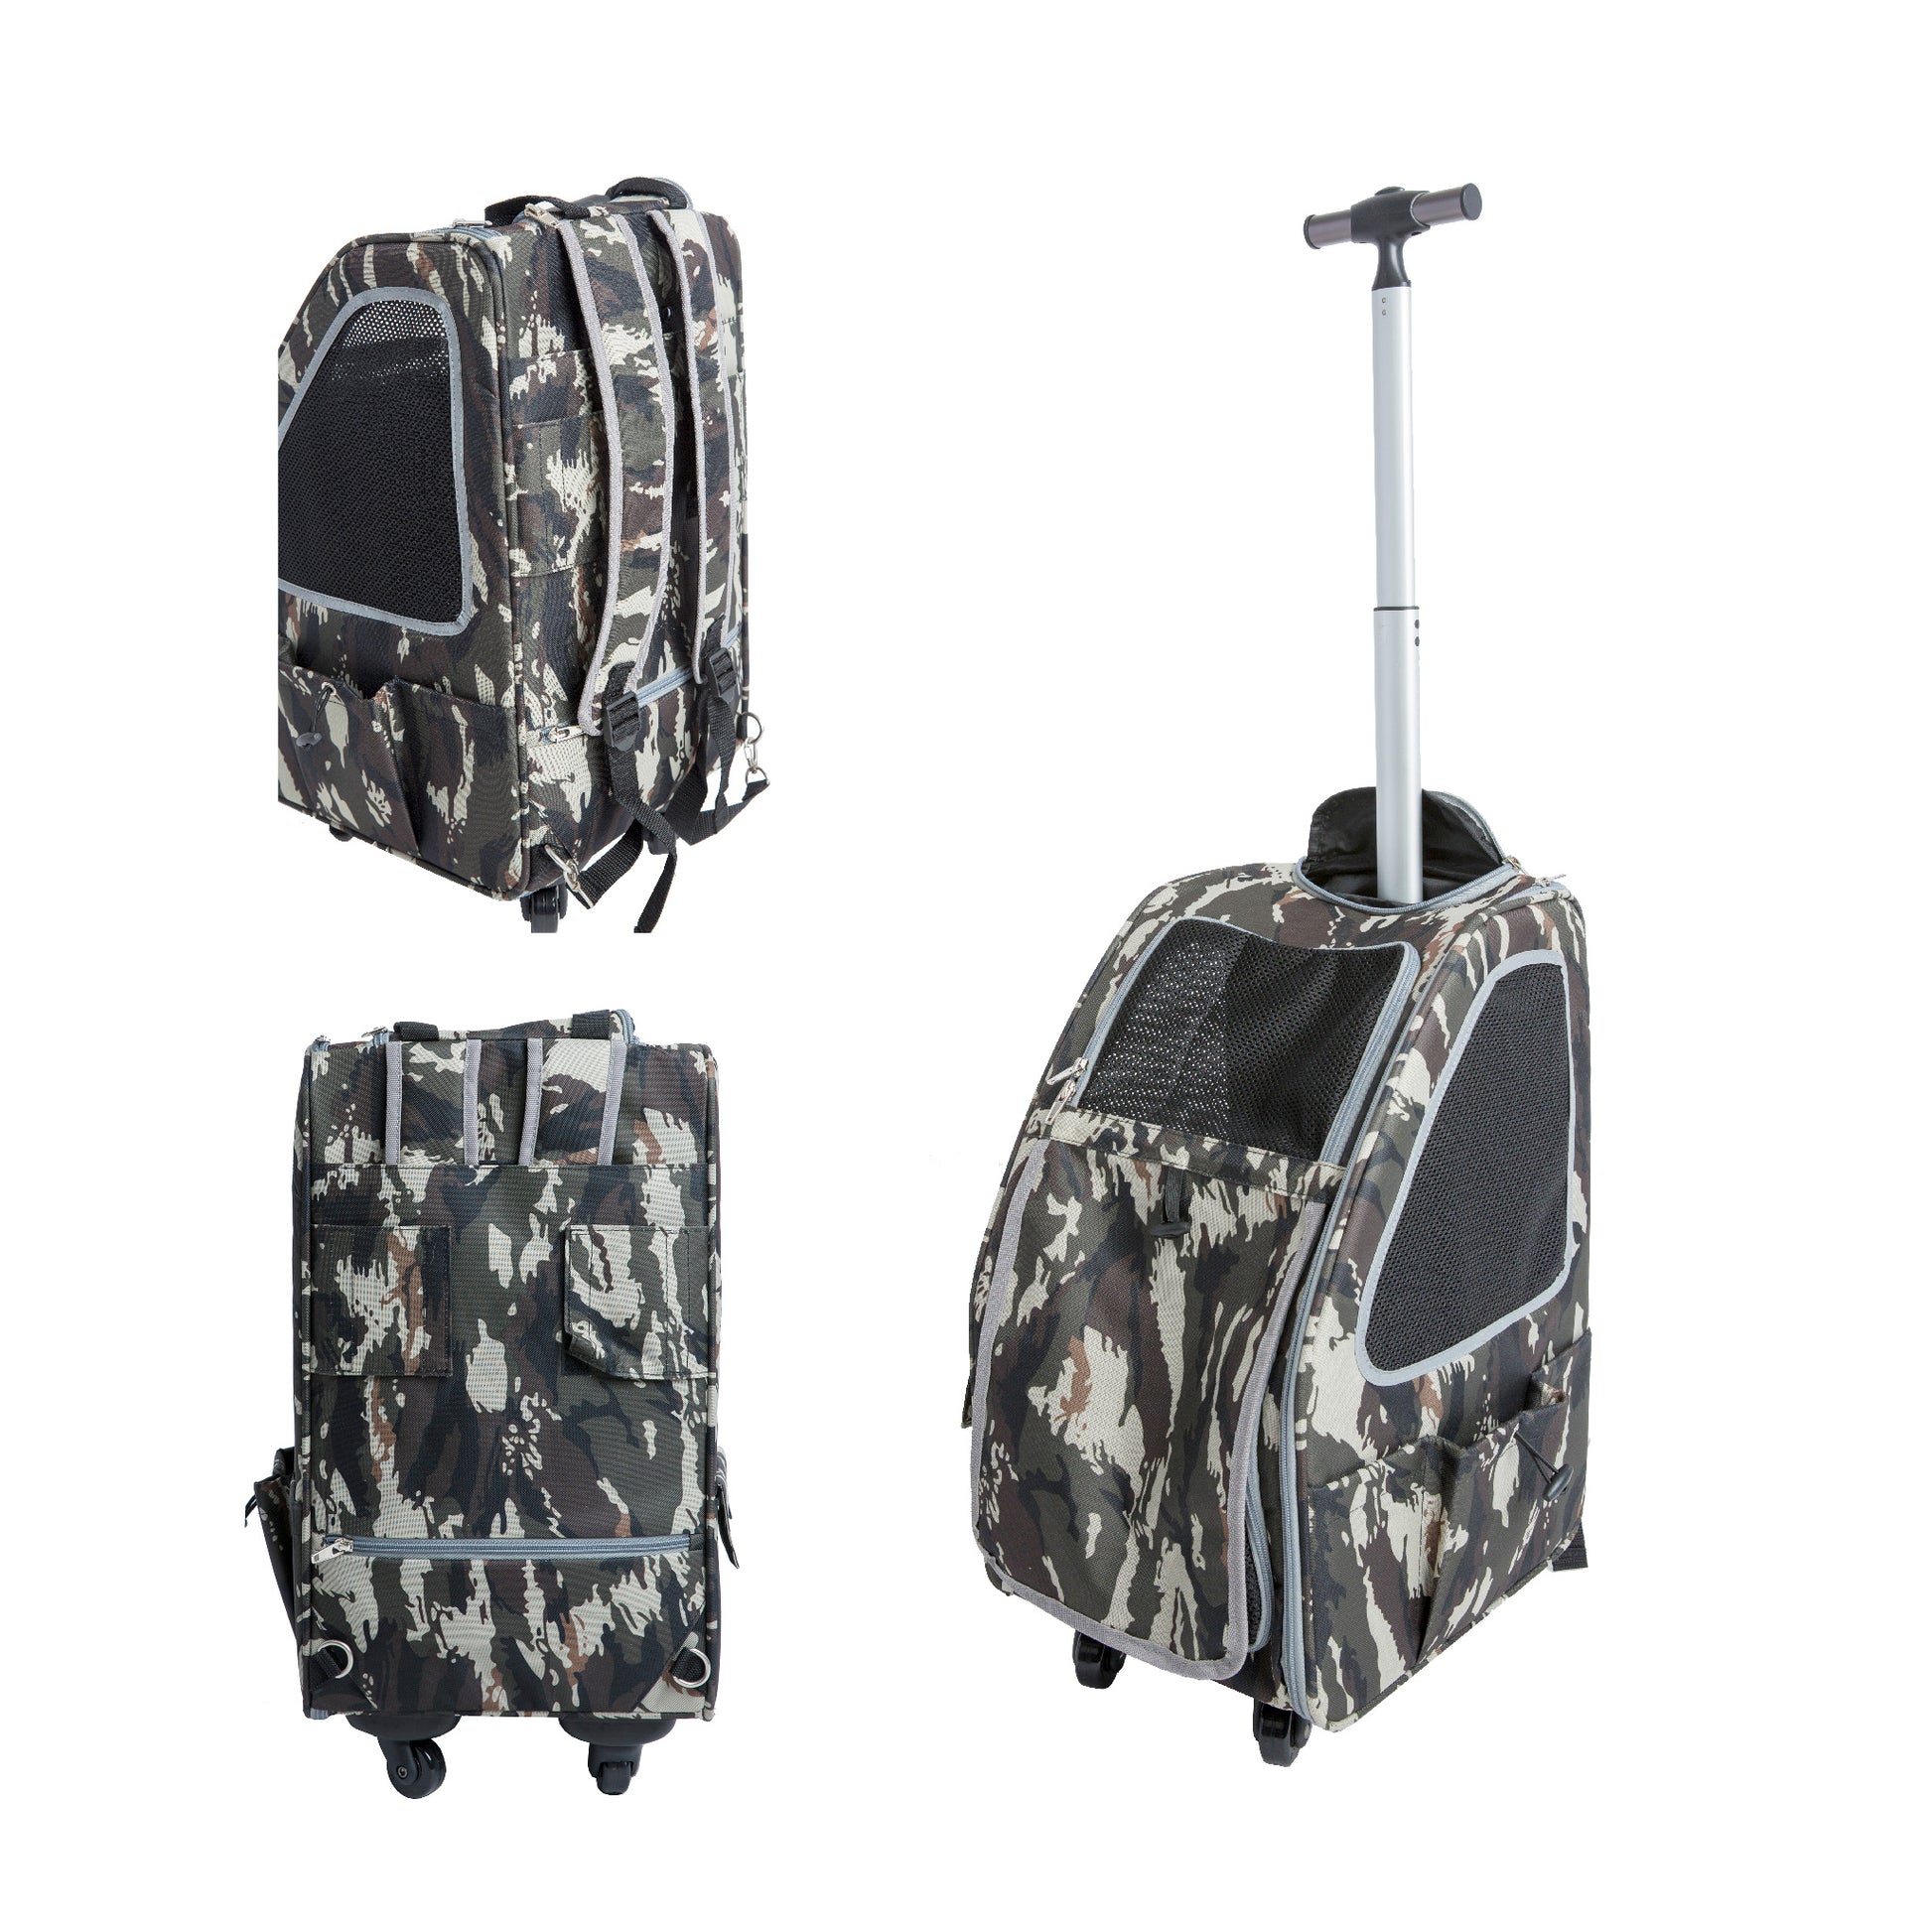 Airline Compliant Pet Carrier, Car Seat & Travel Bag | Includes Leash, Black Camo / Black / Large - Up to 25lbs | ROVERLUND